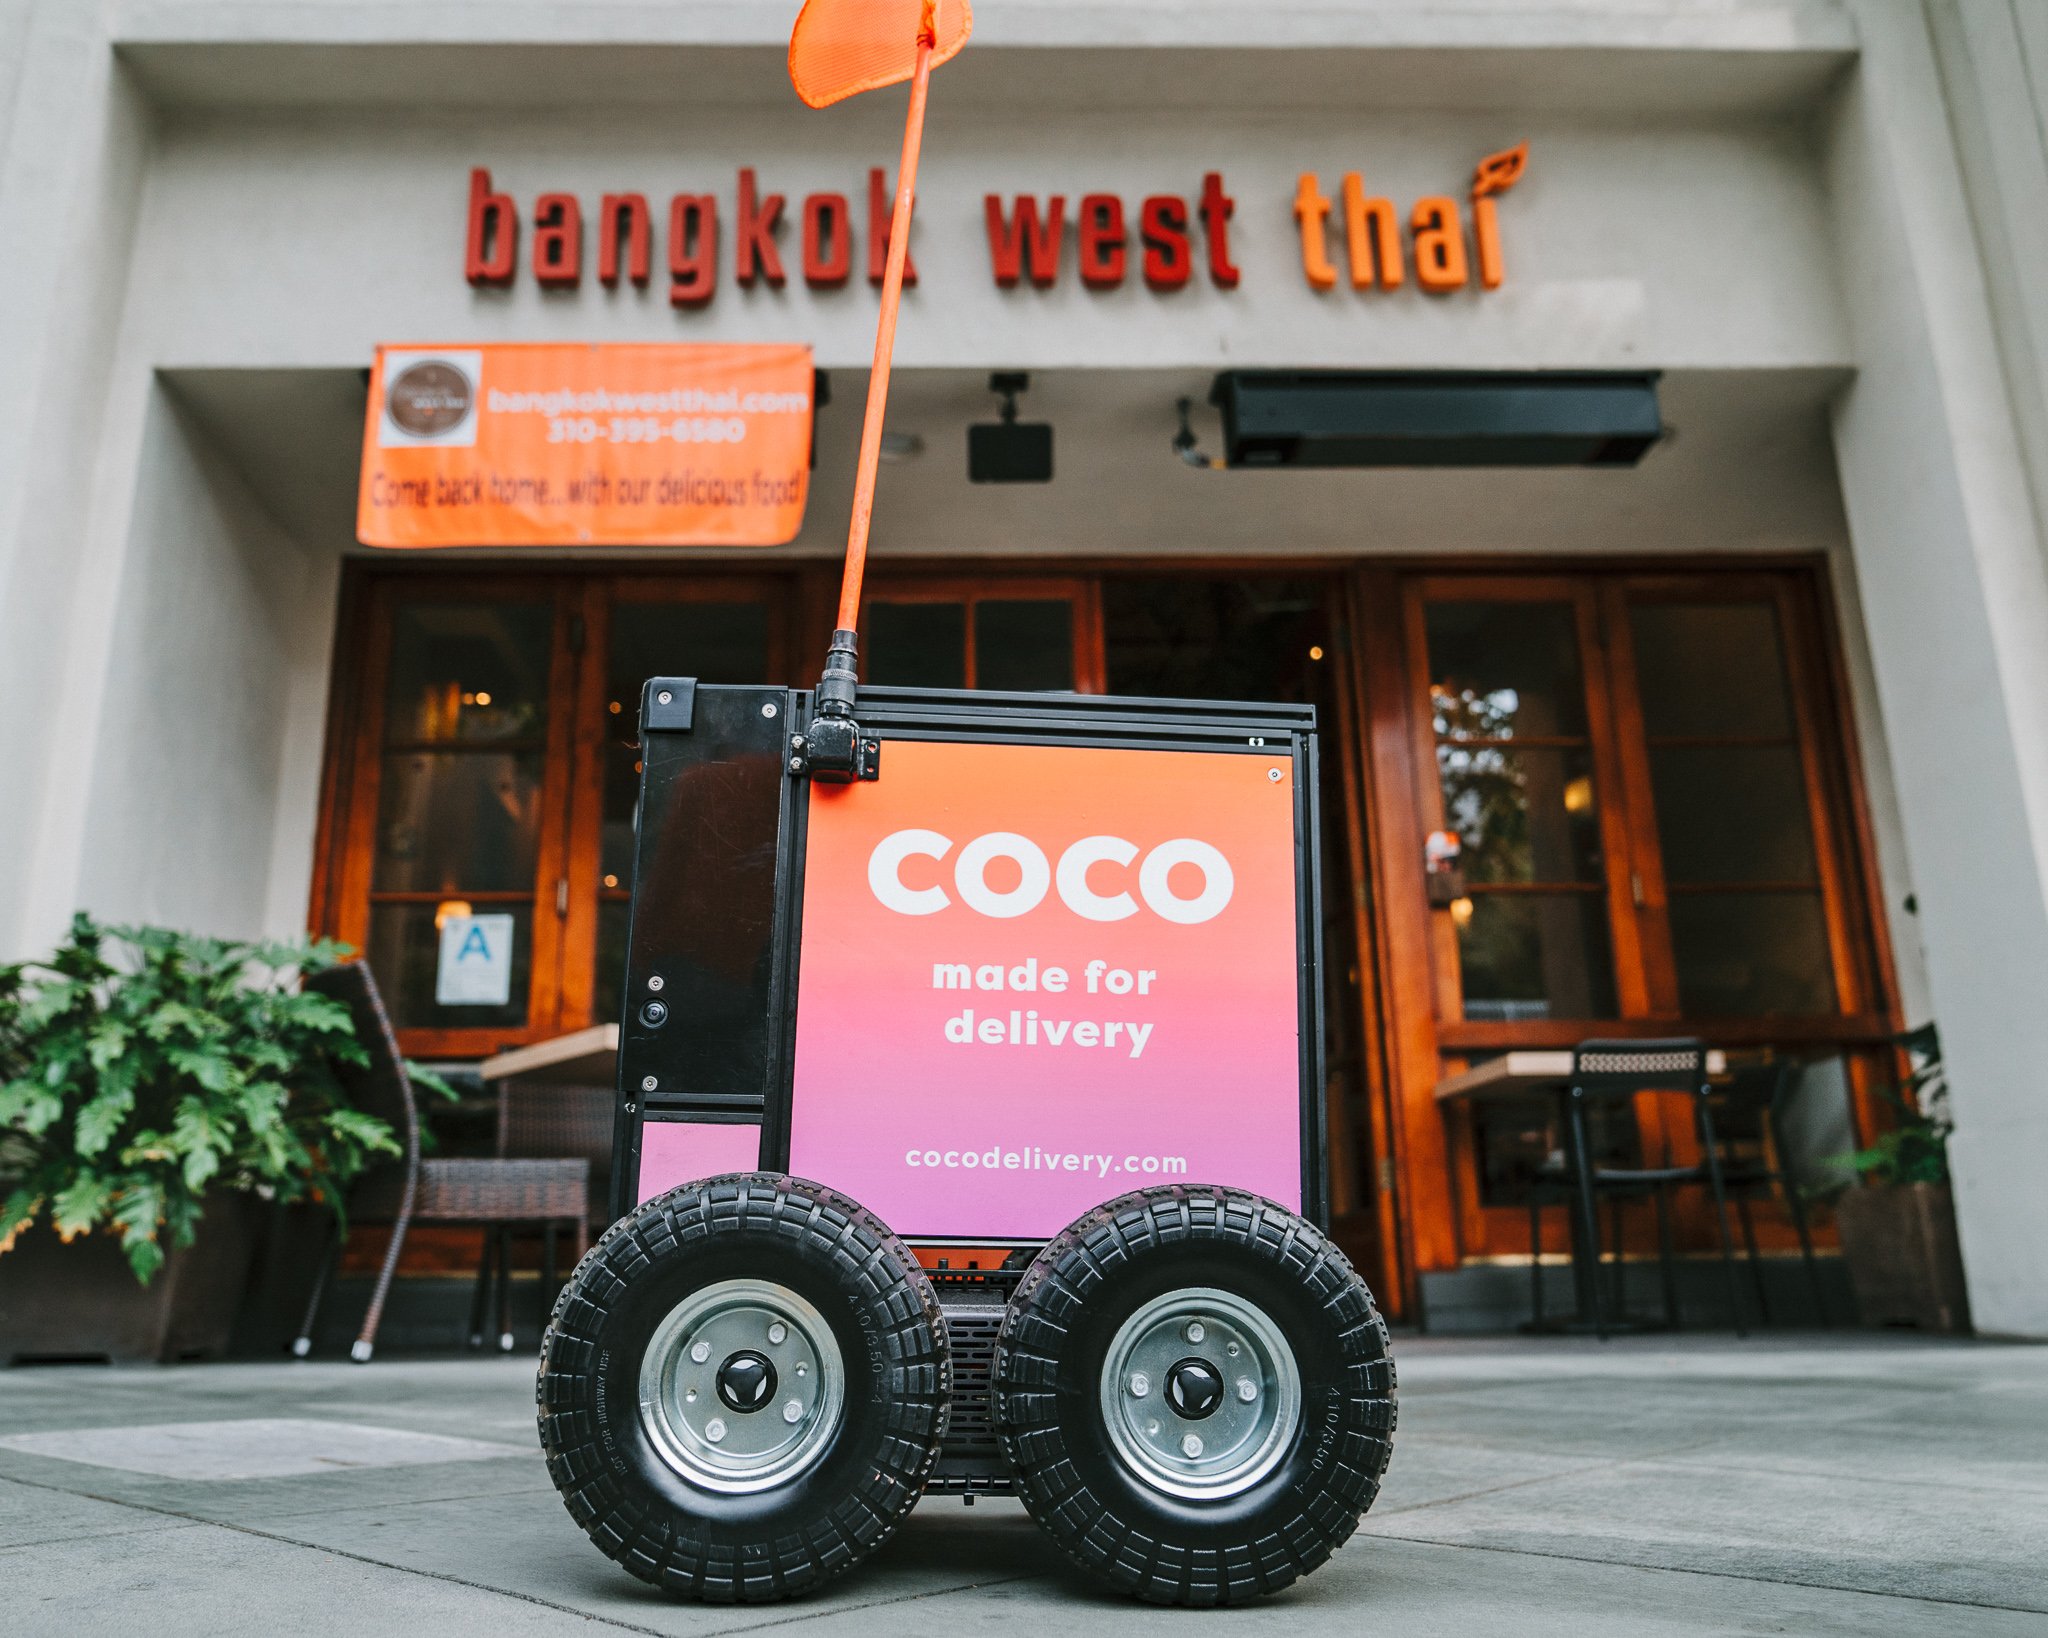 Coco's fleet of food-delivery robots are bringing in profit for